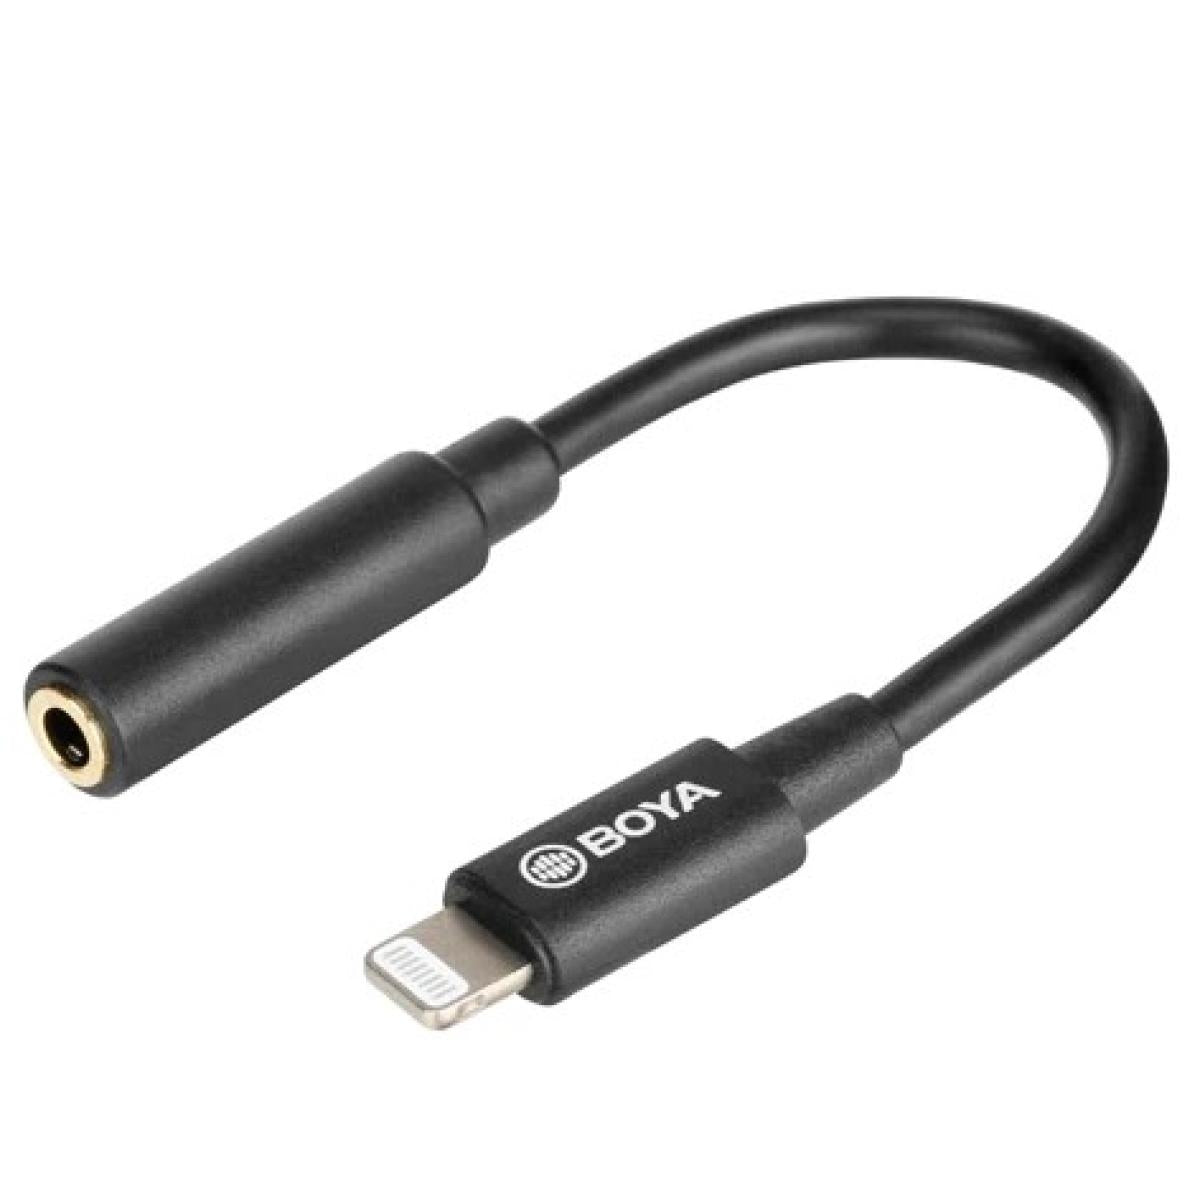 BOYA 3.5mm TRRS Female to Lightning Male Audio Adapter Dongle Cable - Black